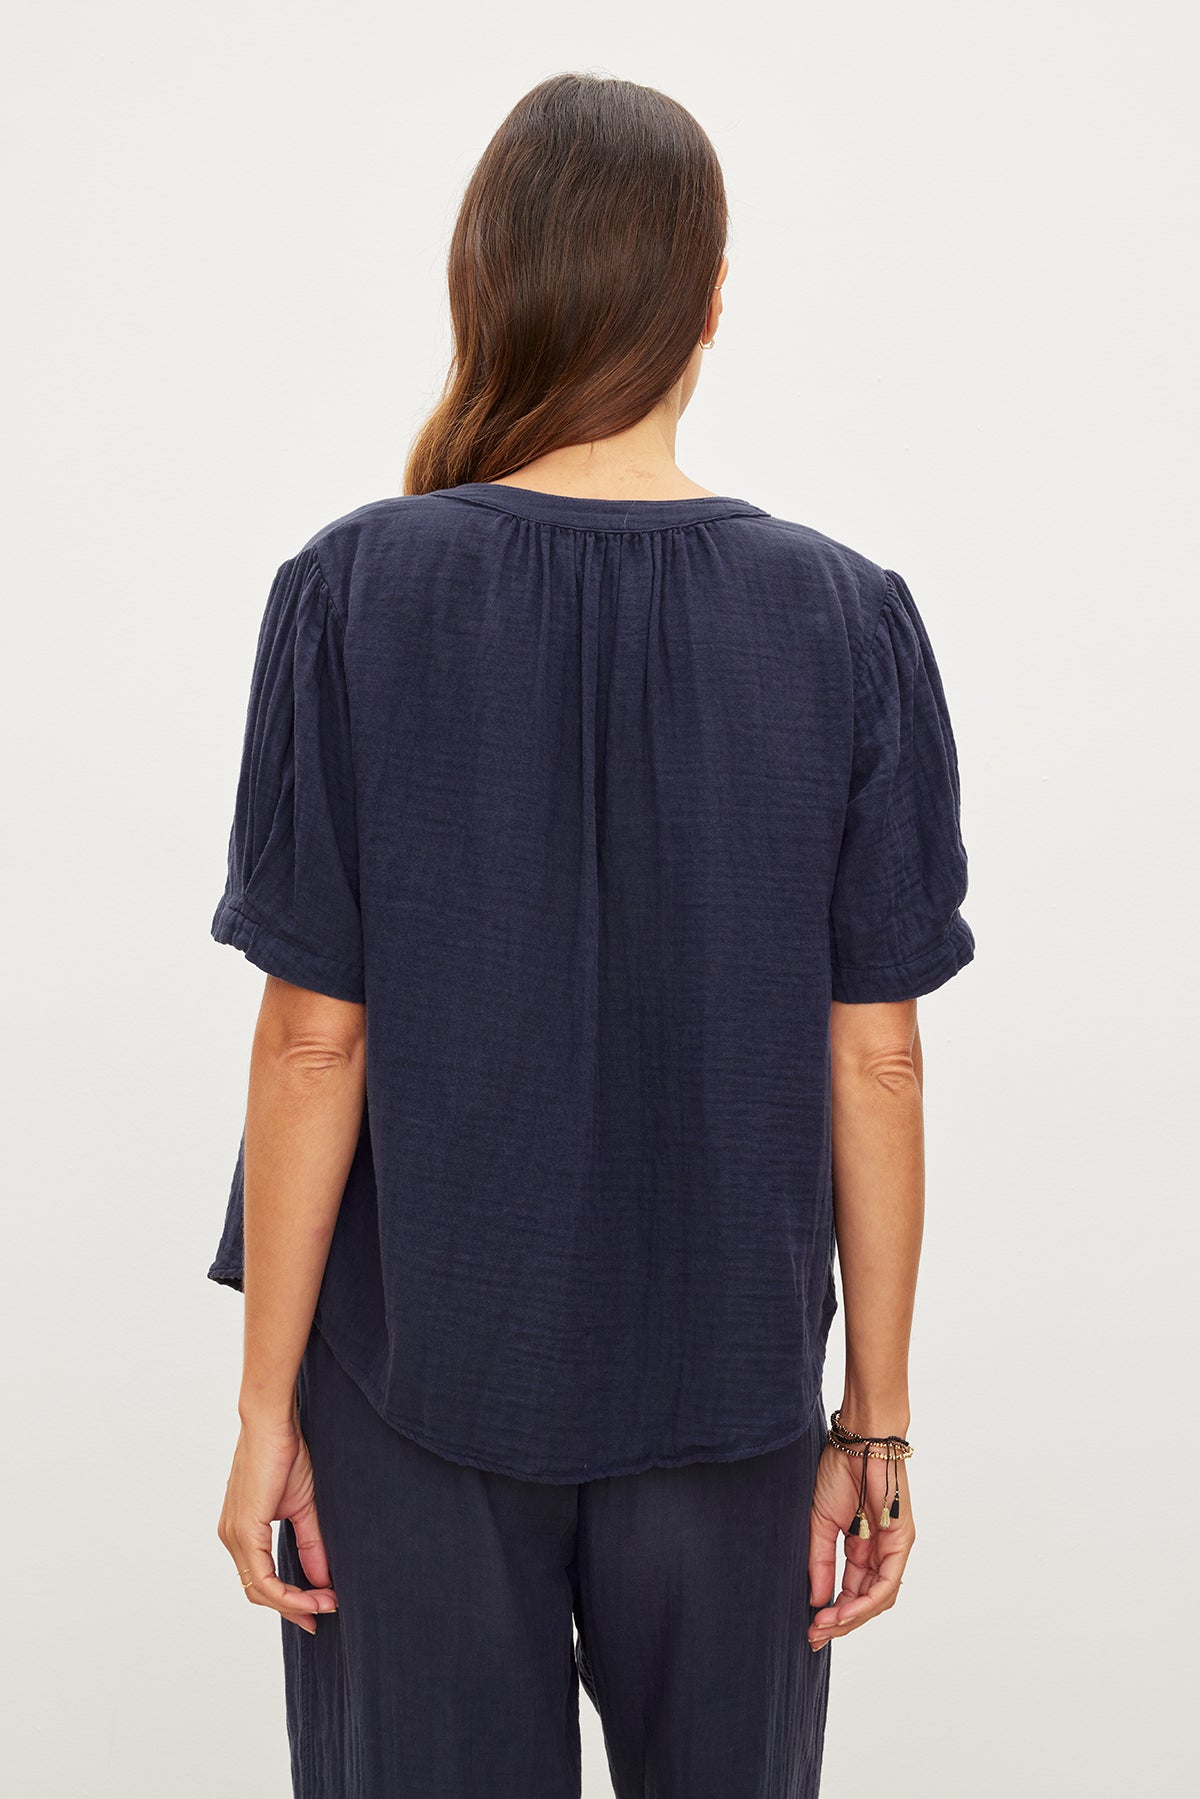 A person with long hair is seen from behind, wearing a DEANN COTTON GAUZE TOP by Velvet by Graham & Spencer with a button front and matching blue pants. The background is plain and light-colored.-35955697483969